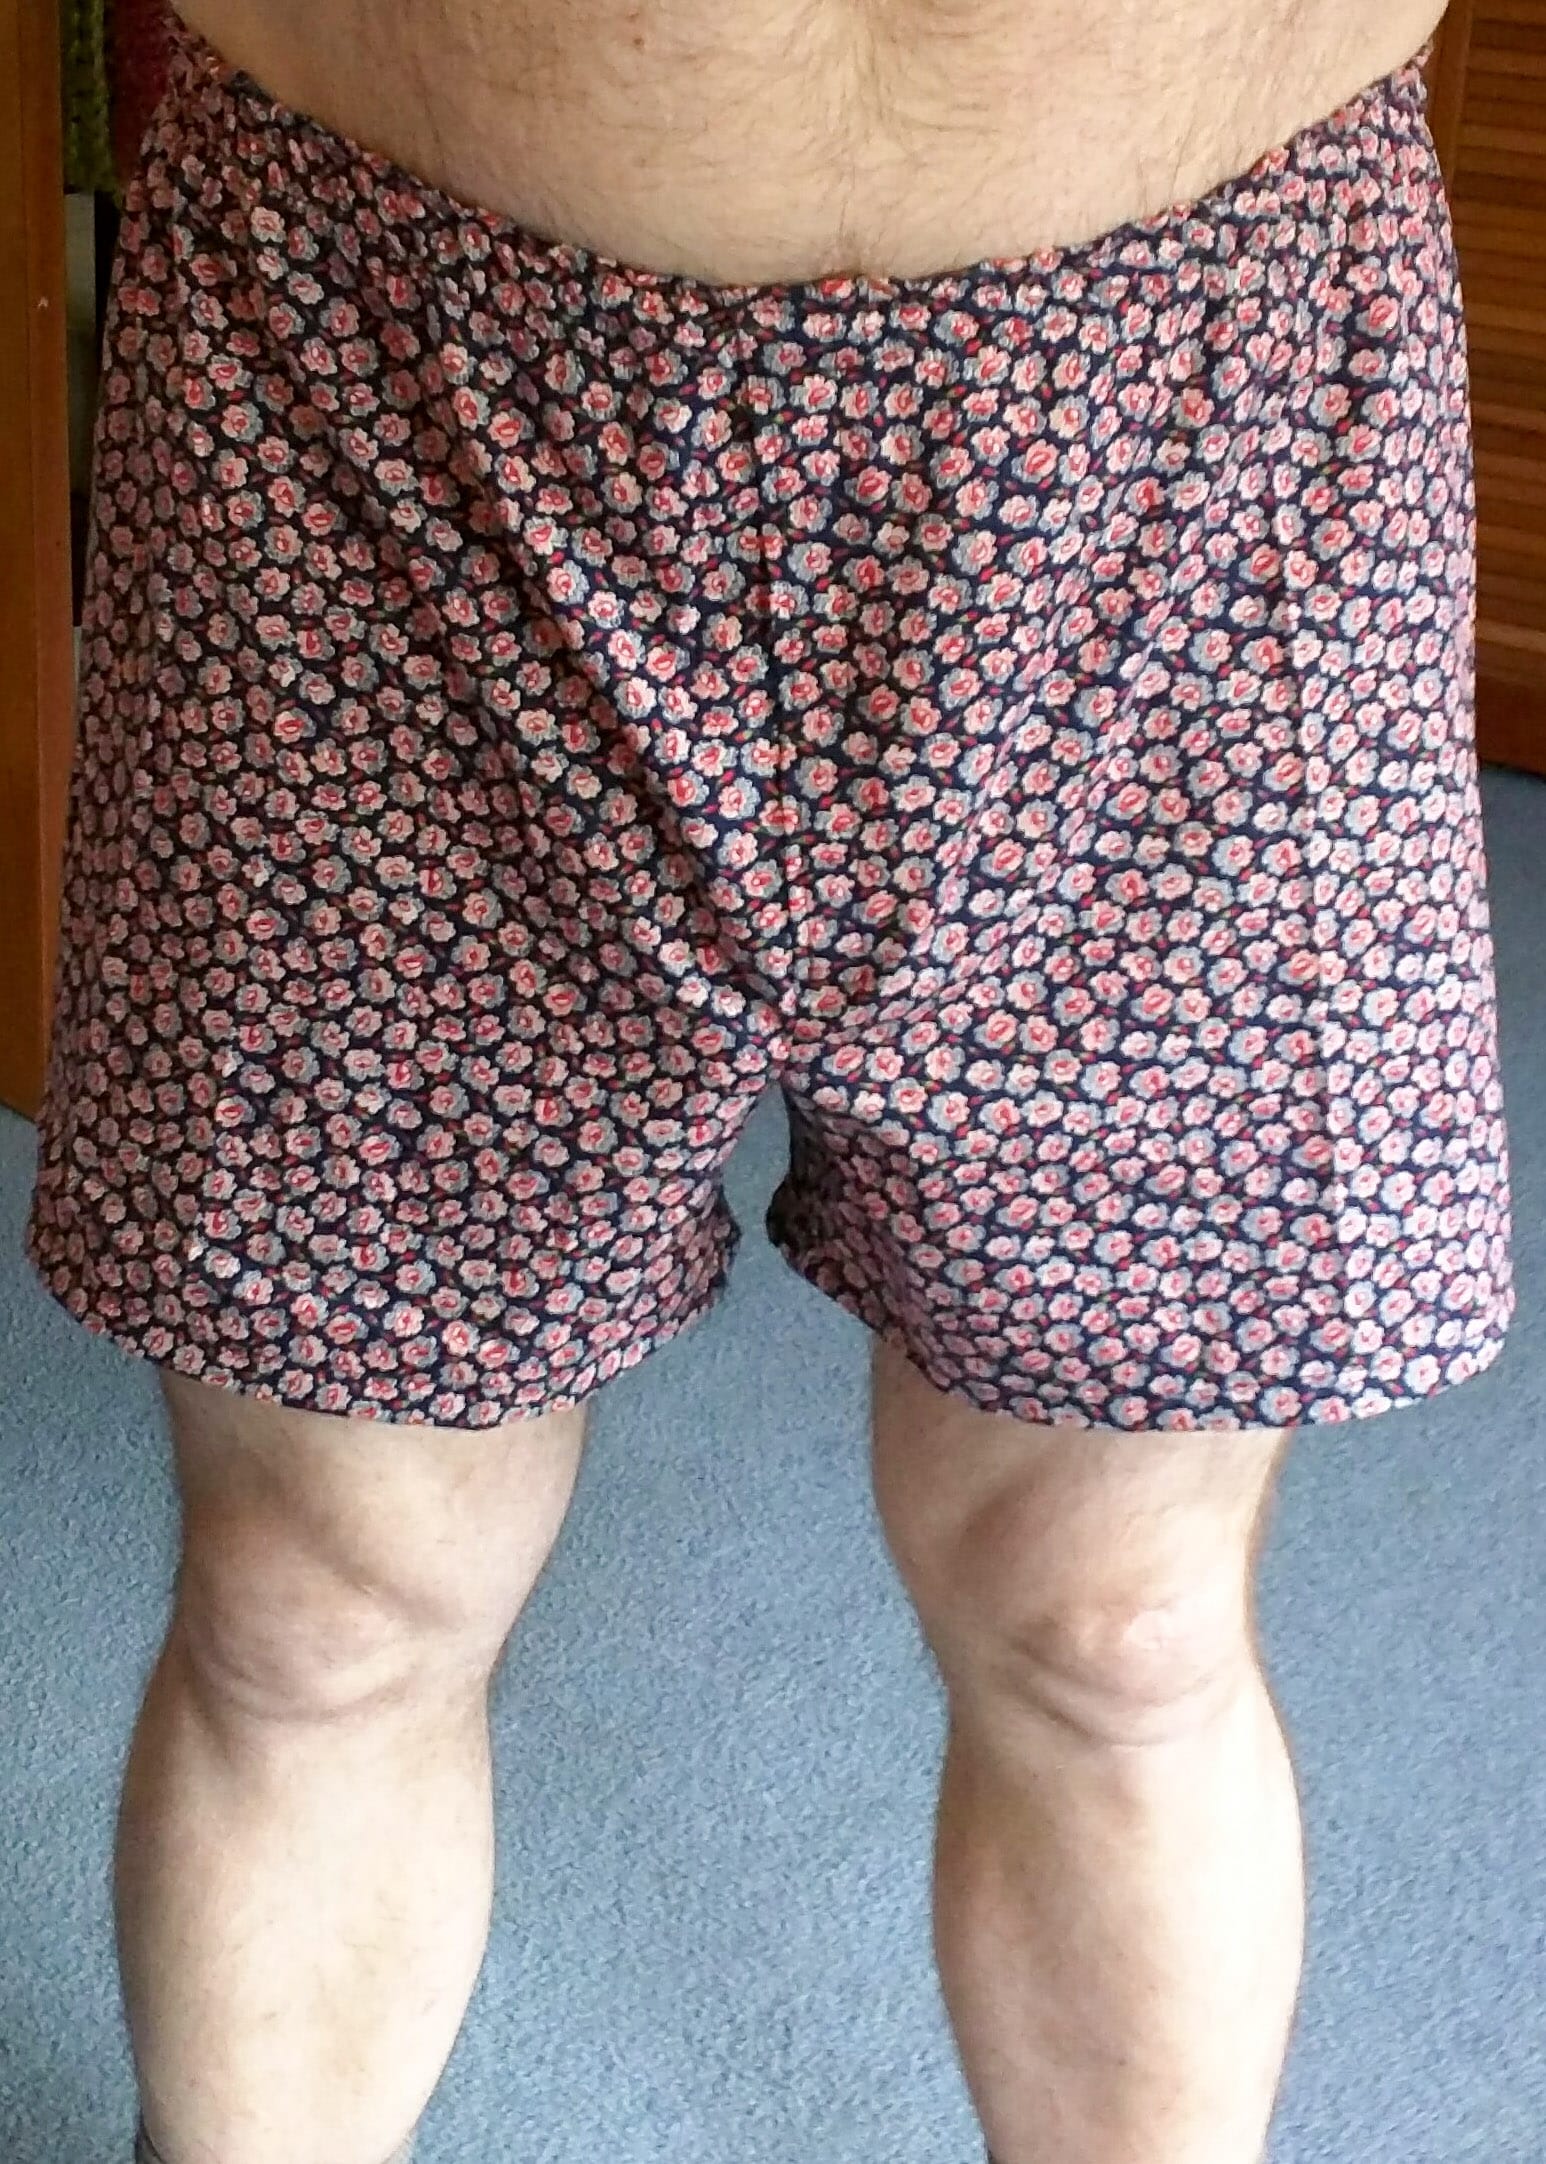 Woven Boxer Shorts - 5 out of 4 Patterns